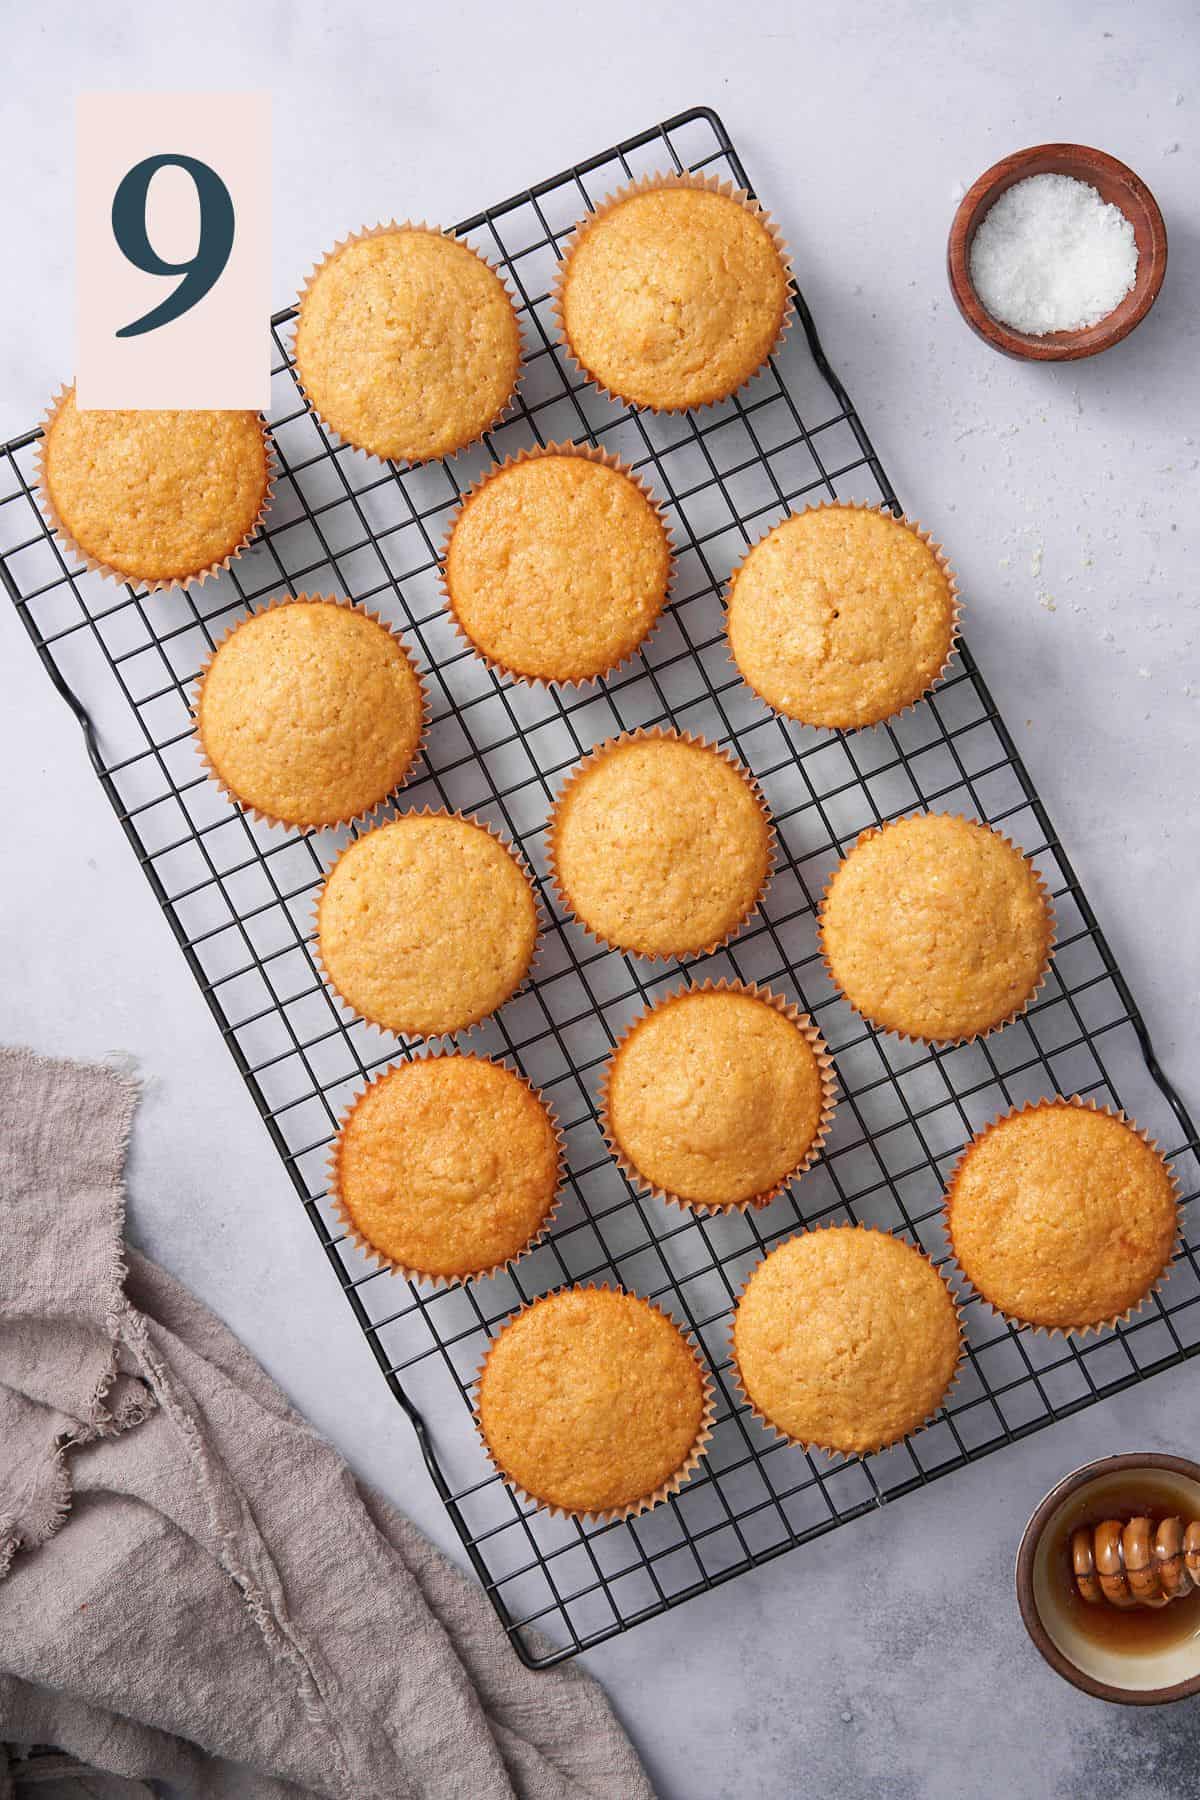 cornbread muffins cooling on a wire rack.